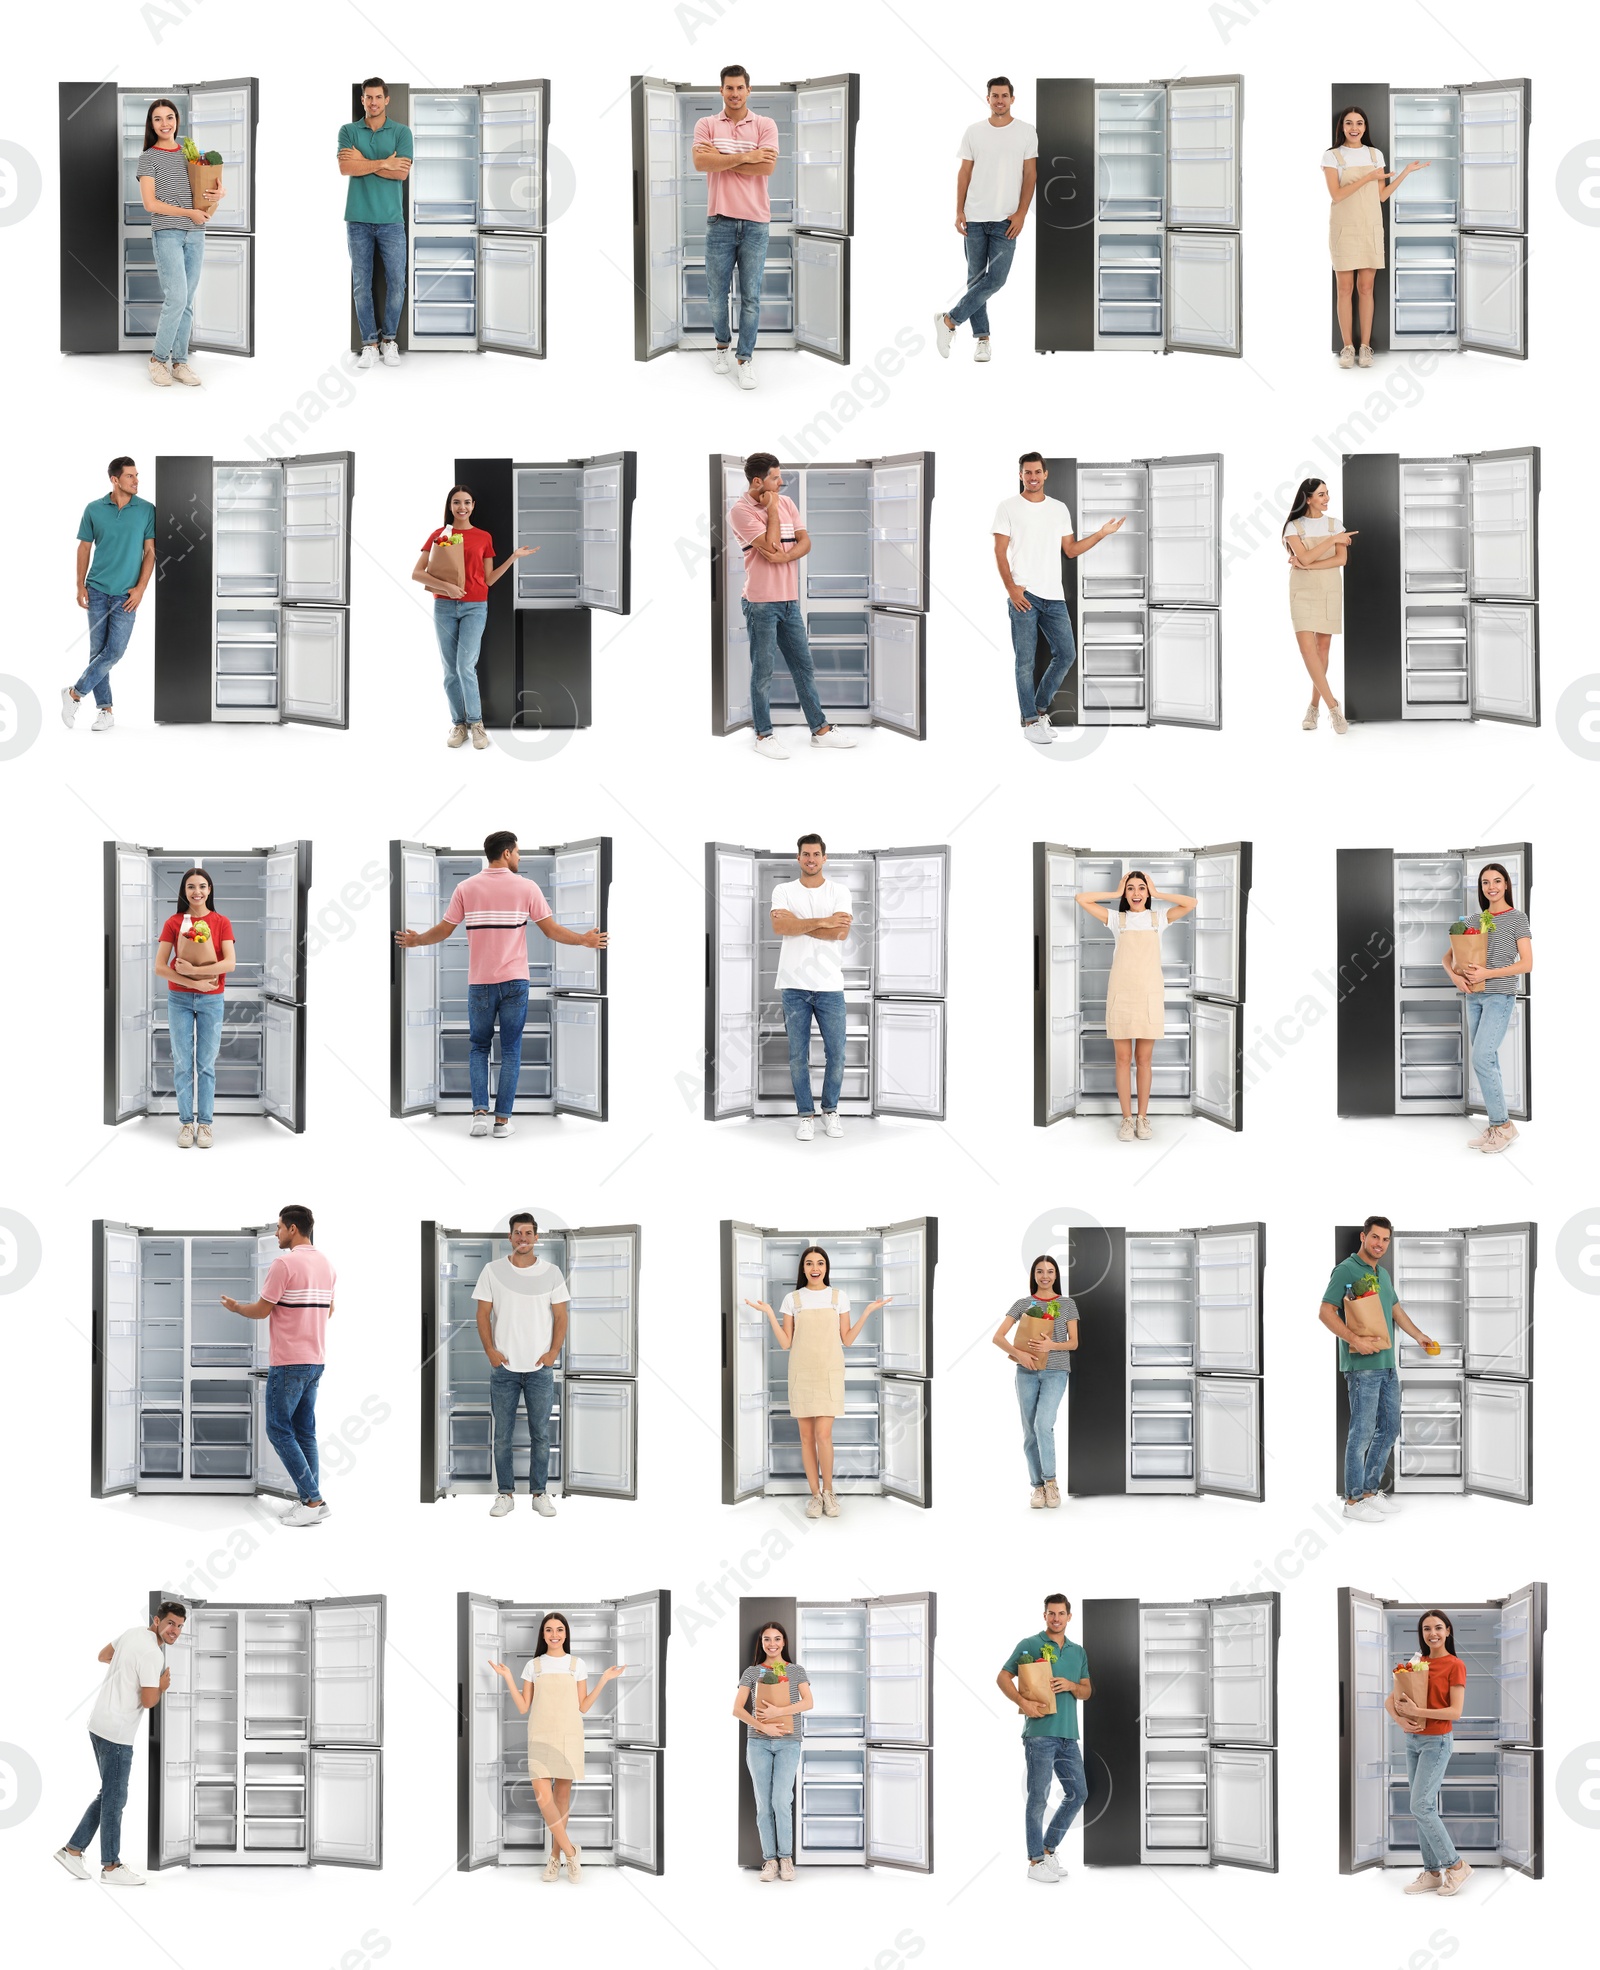 Image of Collage of people near open refrigerators on white background